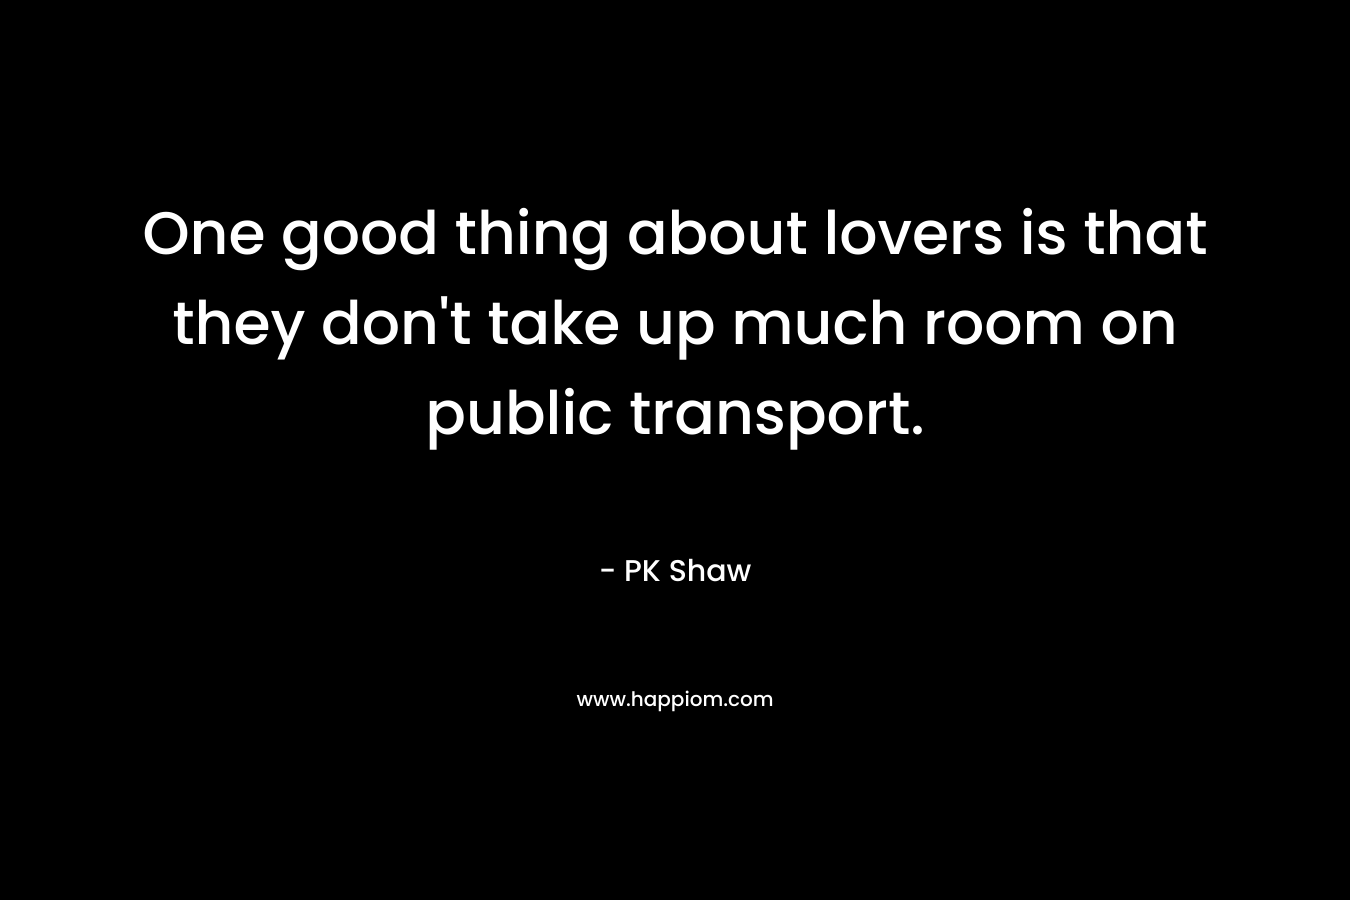 One good thing about lovers is that they don’t take up much room on public transport. – PK Shaw